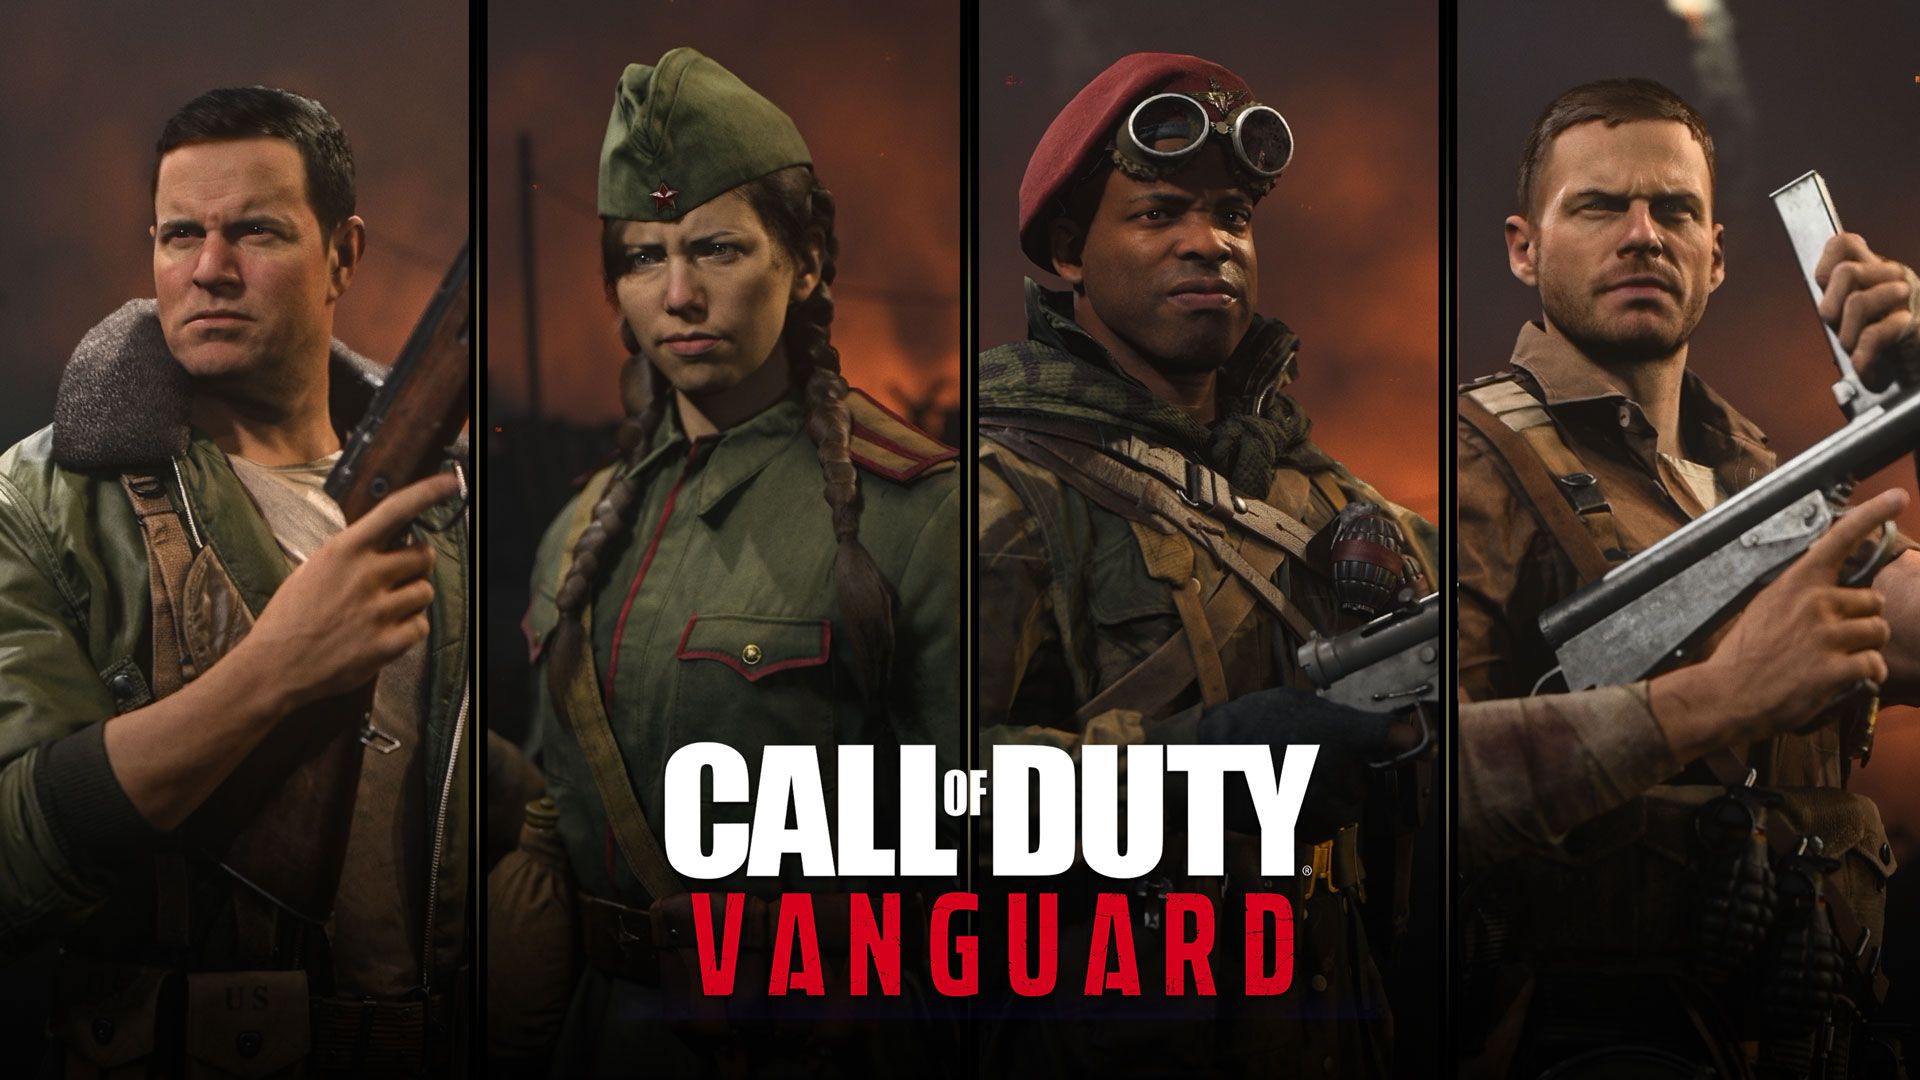 IGN - Call of Duty: Vanguard's campaign may look and sound spectacular, but  it could've used more variety in its mission design to distinguish its  gameplay from the many battles we've fought